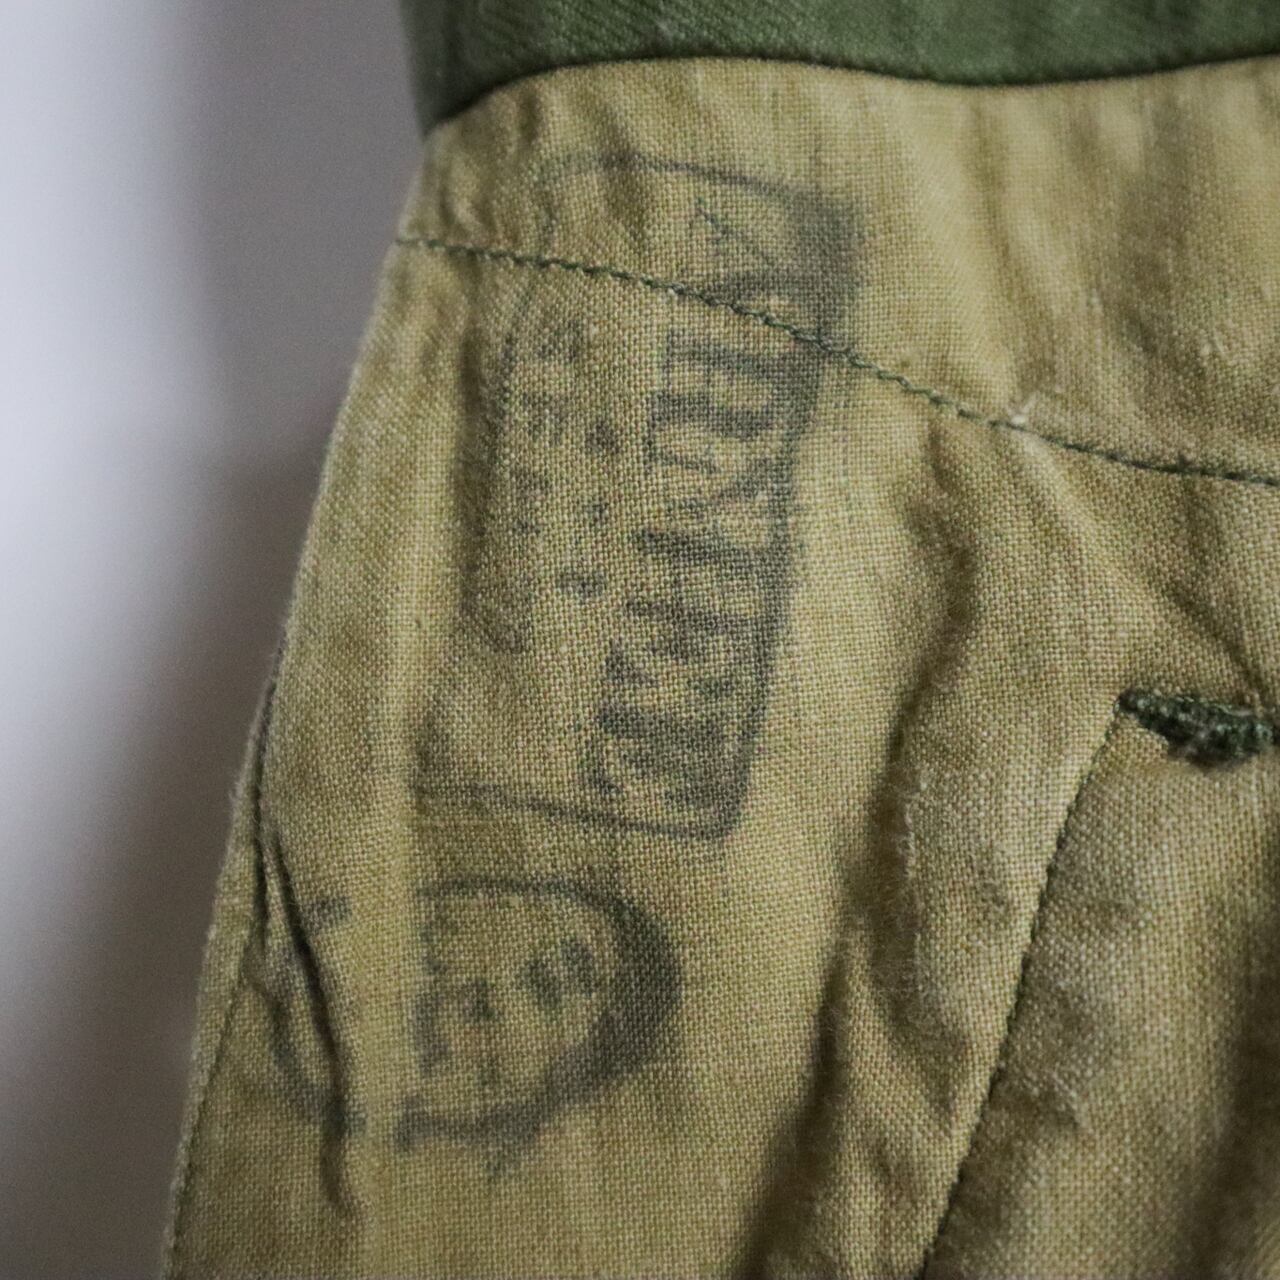 50's FRENCH ARMY M-47 TROUSERS SIZE33 前期 M47 カーゴパンツ | CADAL8